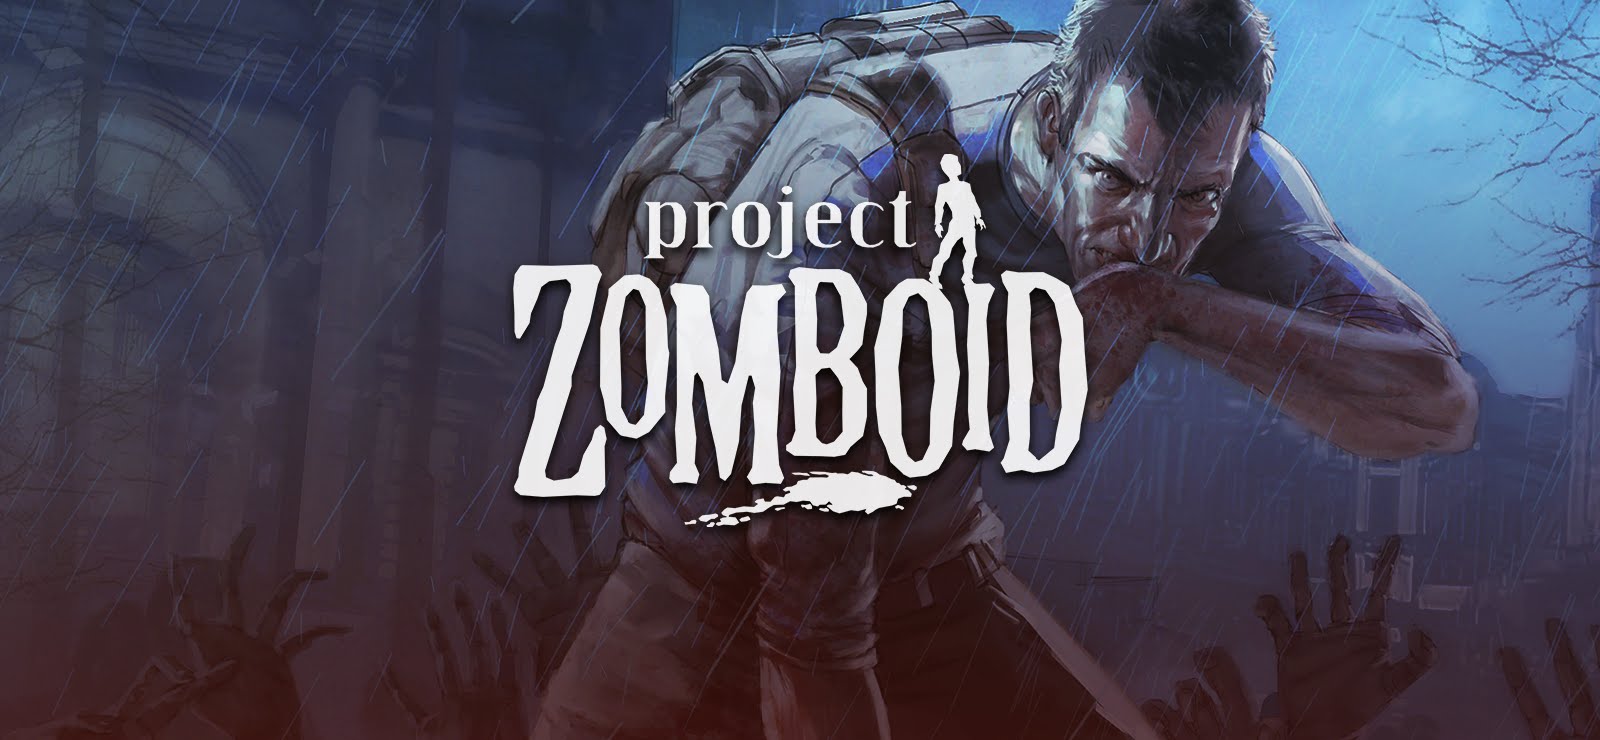 I've download the game on steam unlocked. Anybody know how can i run the  mods on this version (Build 41) : r/projectzomboid